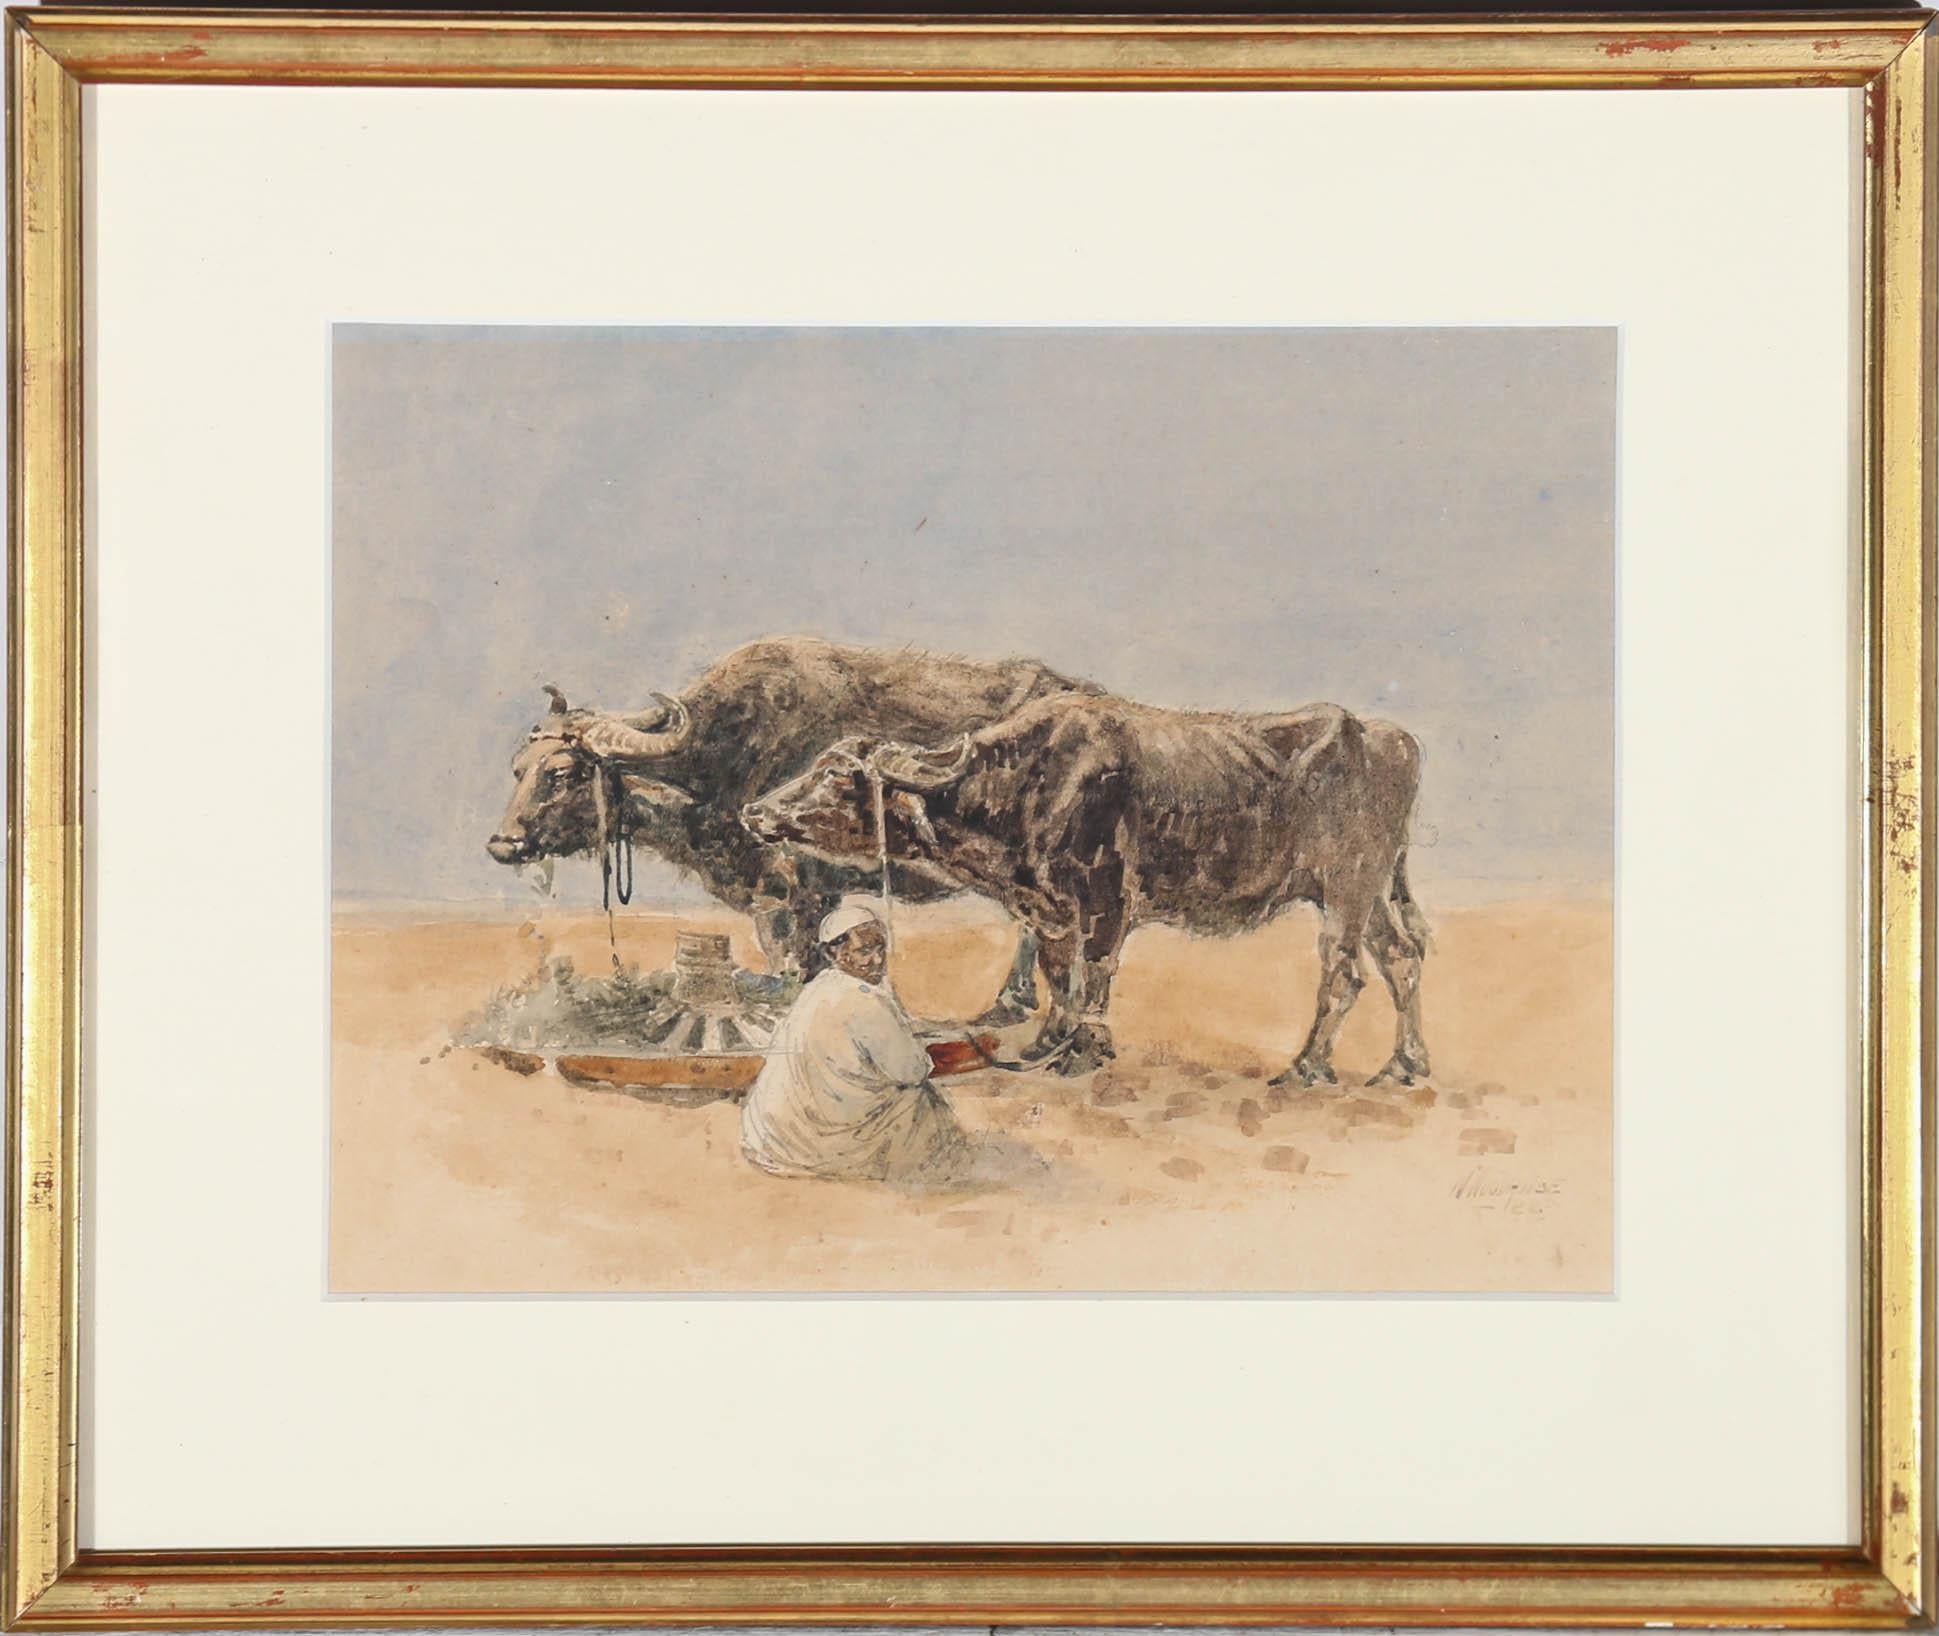 This exquisite eastern watercolour depicts a native cattle farmer, leading his two haltered oxen to feed in a barren desert landscape. The painting has been signed and dated to the lower right. Immaculately presented in an elegant bevelled edged